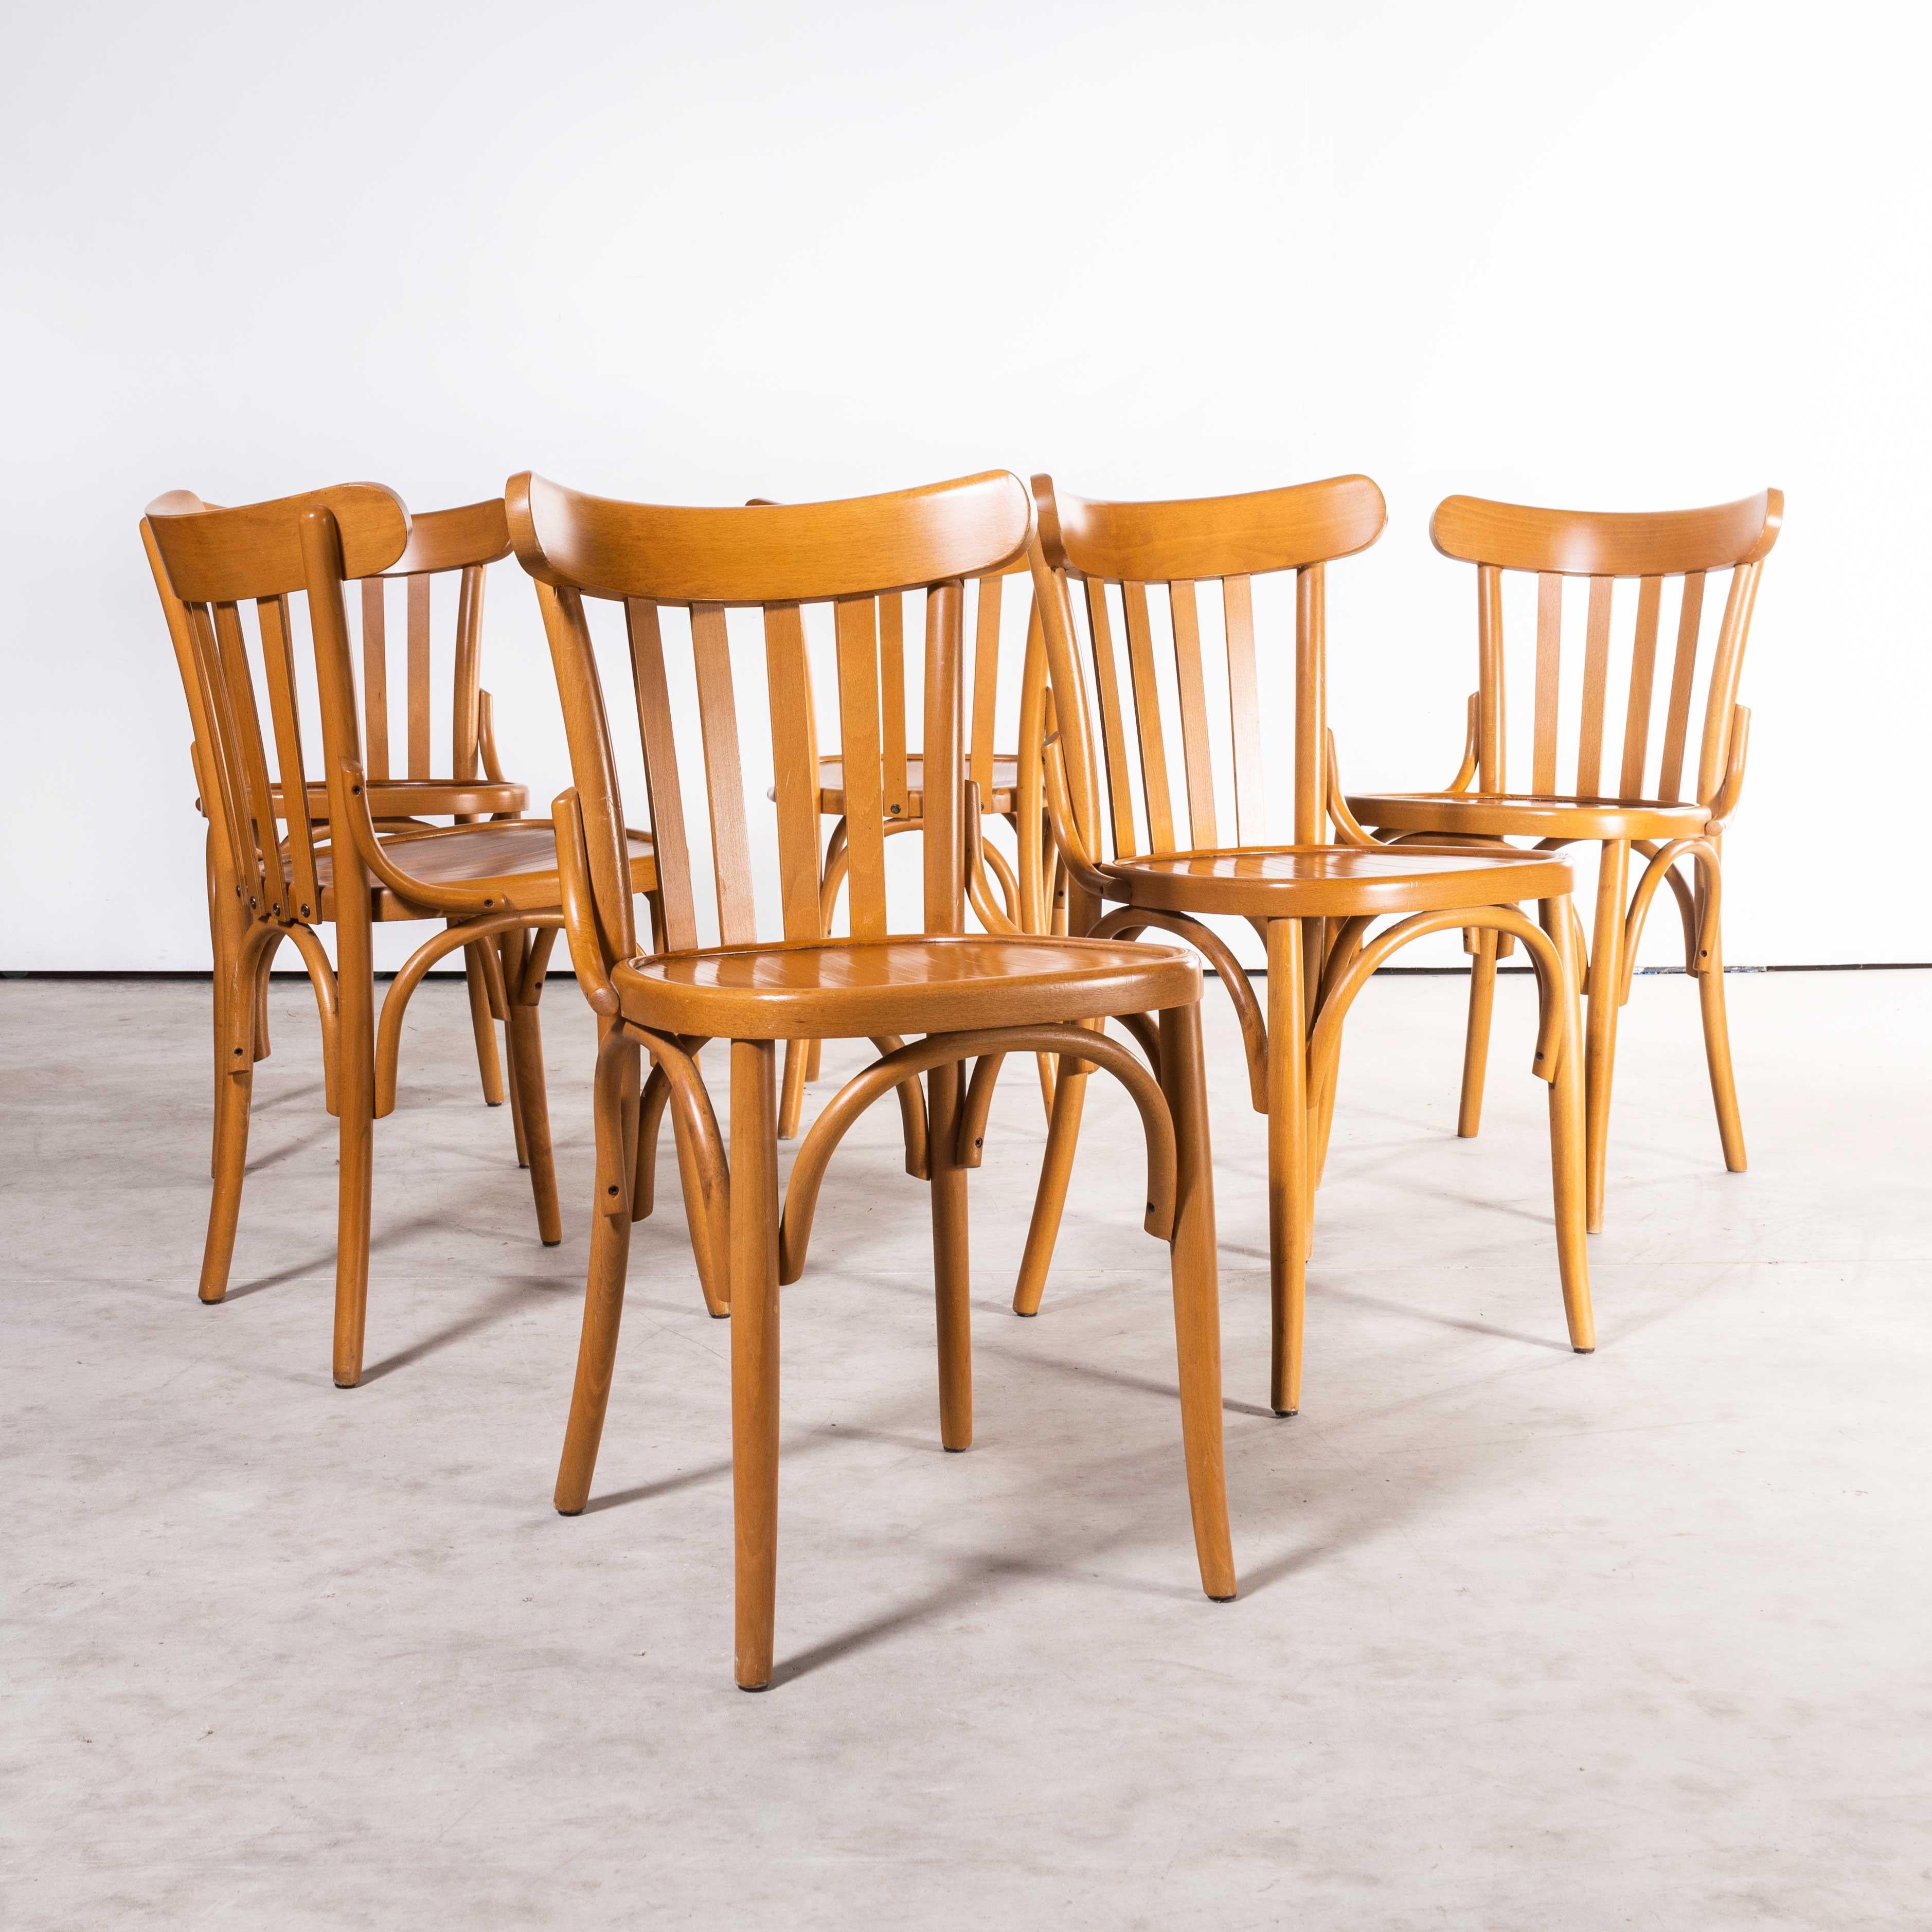 1970’s Bentwood honey beech striped seat bentwood dining chairs – set of six
1970’s Bentwood honey beech striped seat bentwood dining chairs – set of six. Sourced in France these are late production chairs from a traditional bentwood factory in